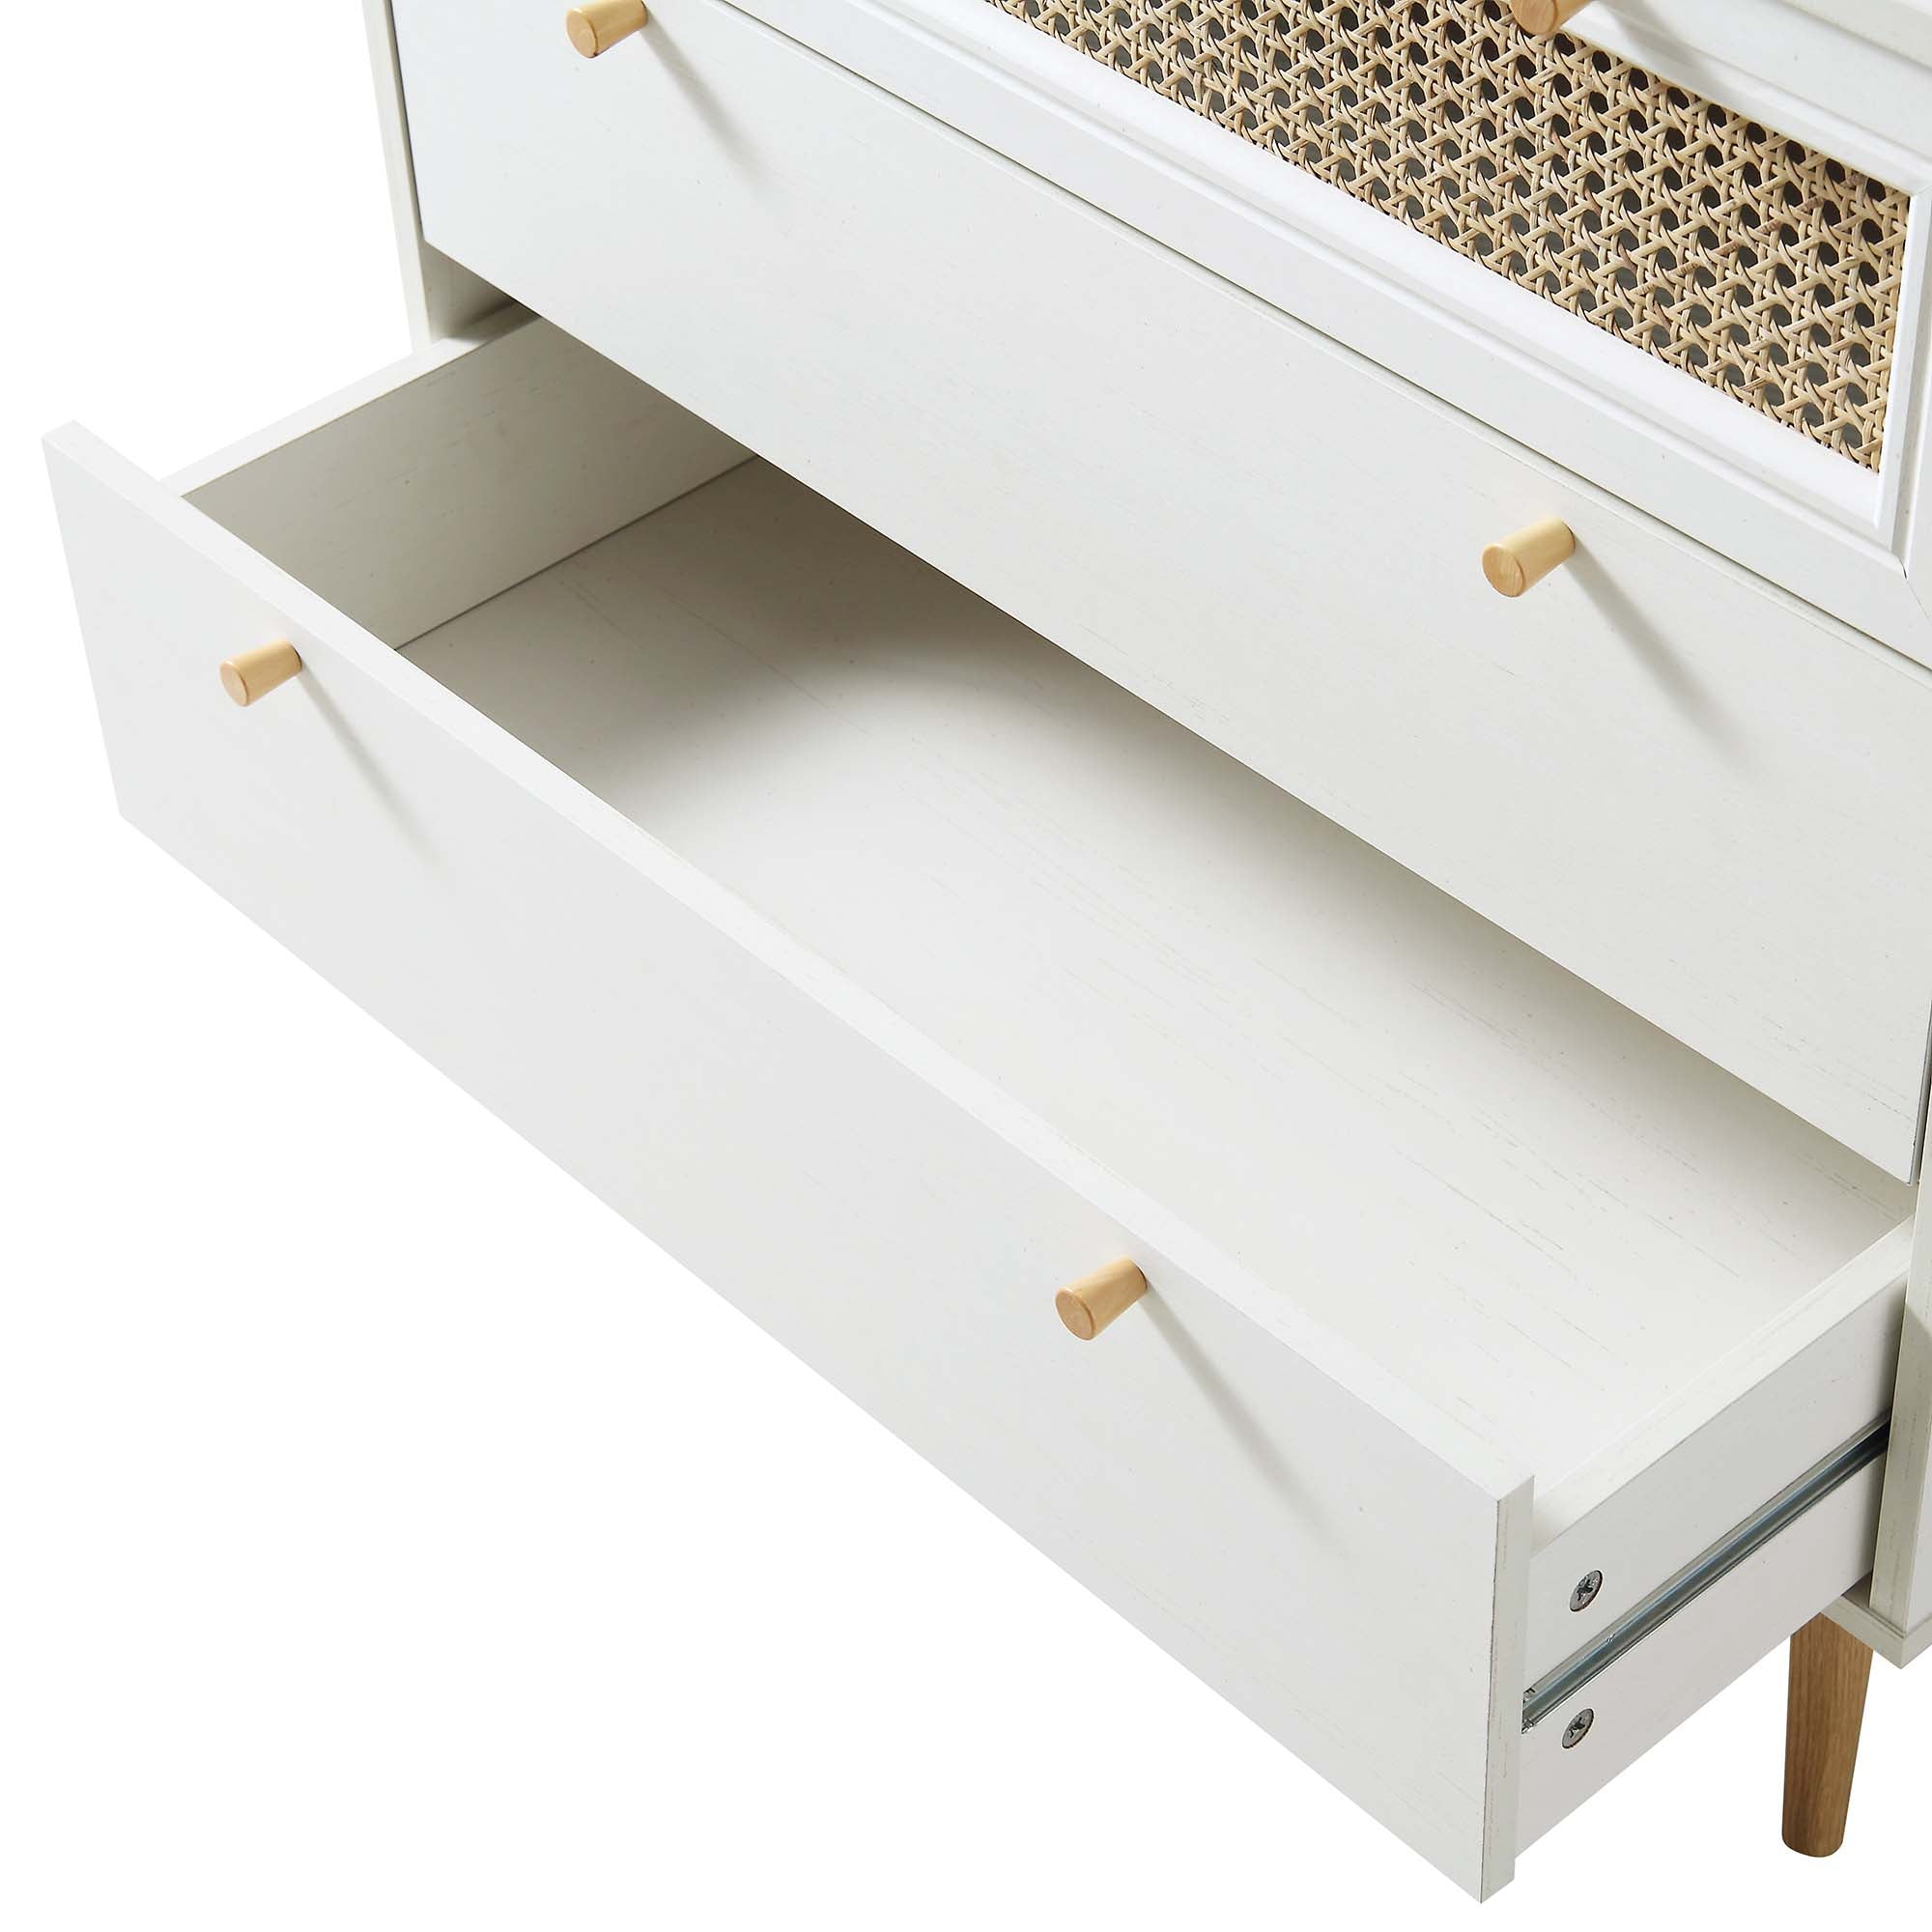 Anya Woven Rattan Chest of 3 Drawers in White